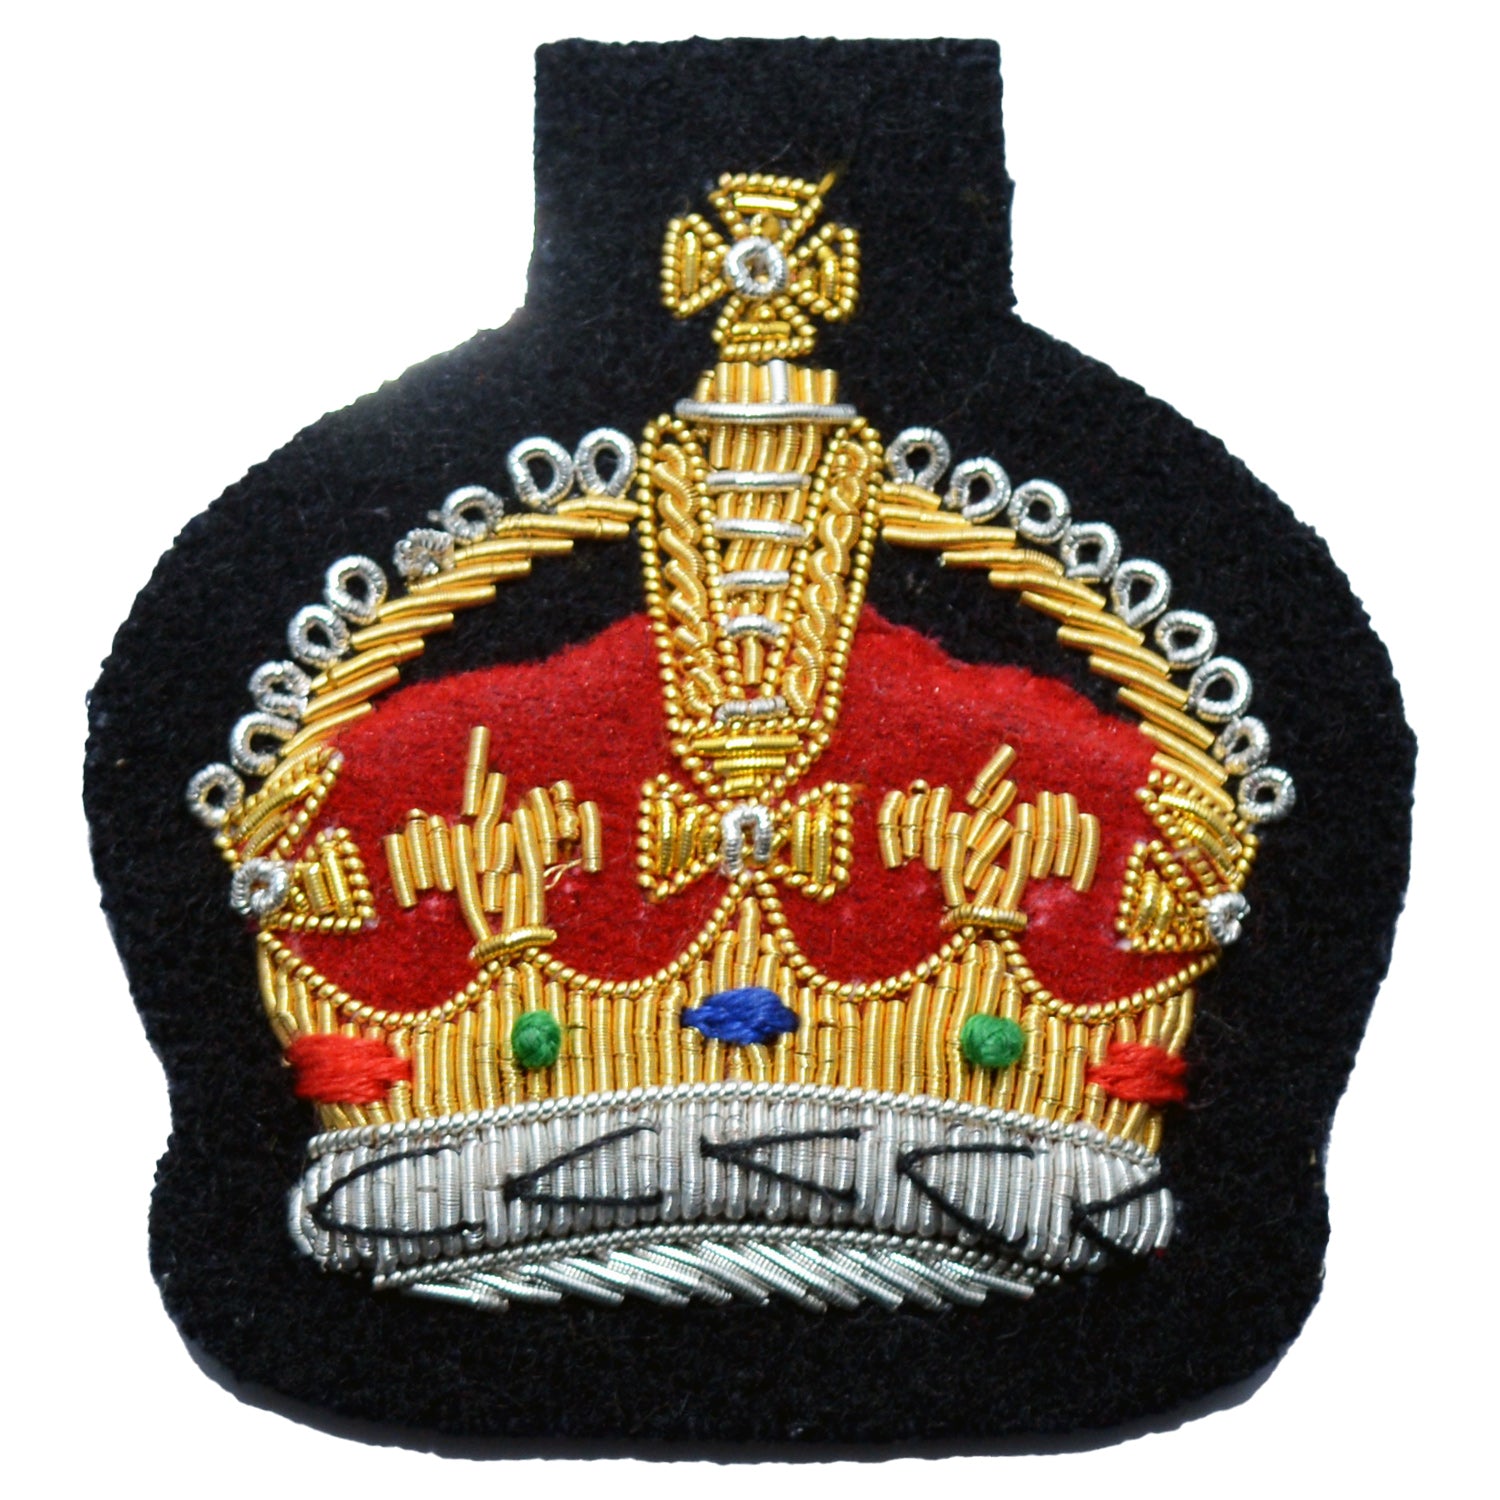 (King's Crown) QMS, CSgt and SSgt Small Crown Rank Badge Royal Tank Regiment NCO British Army